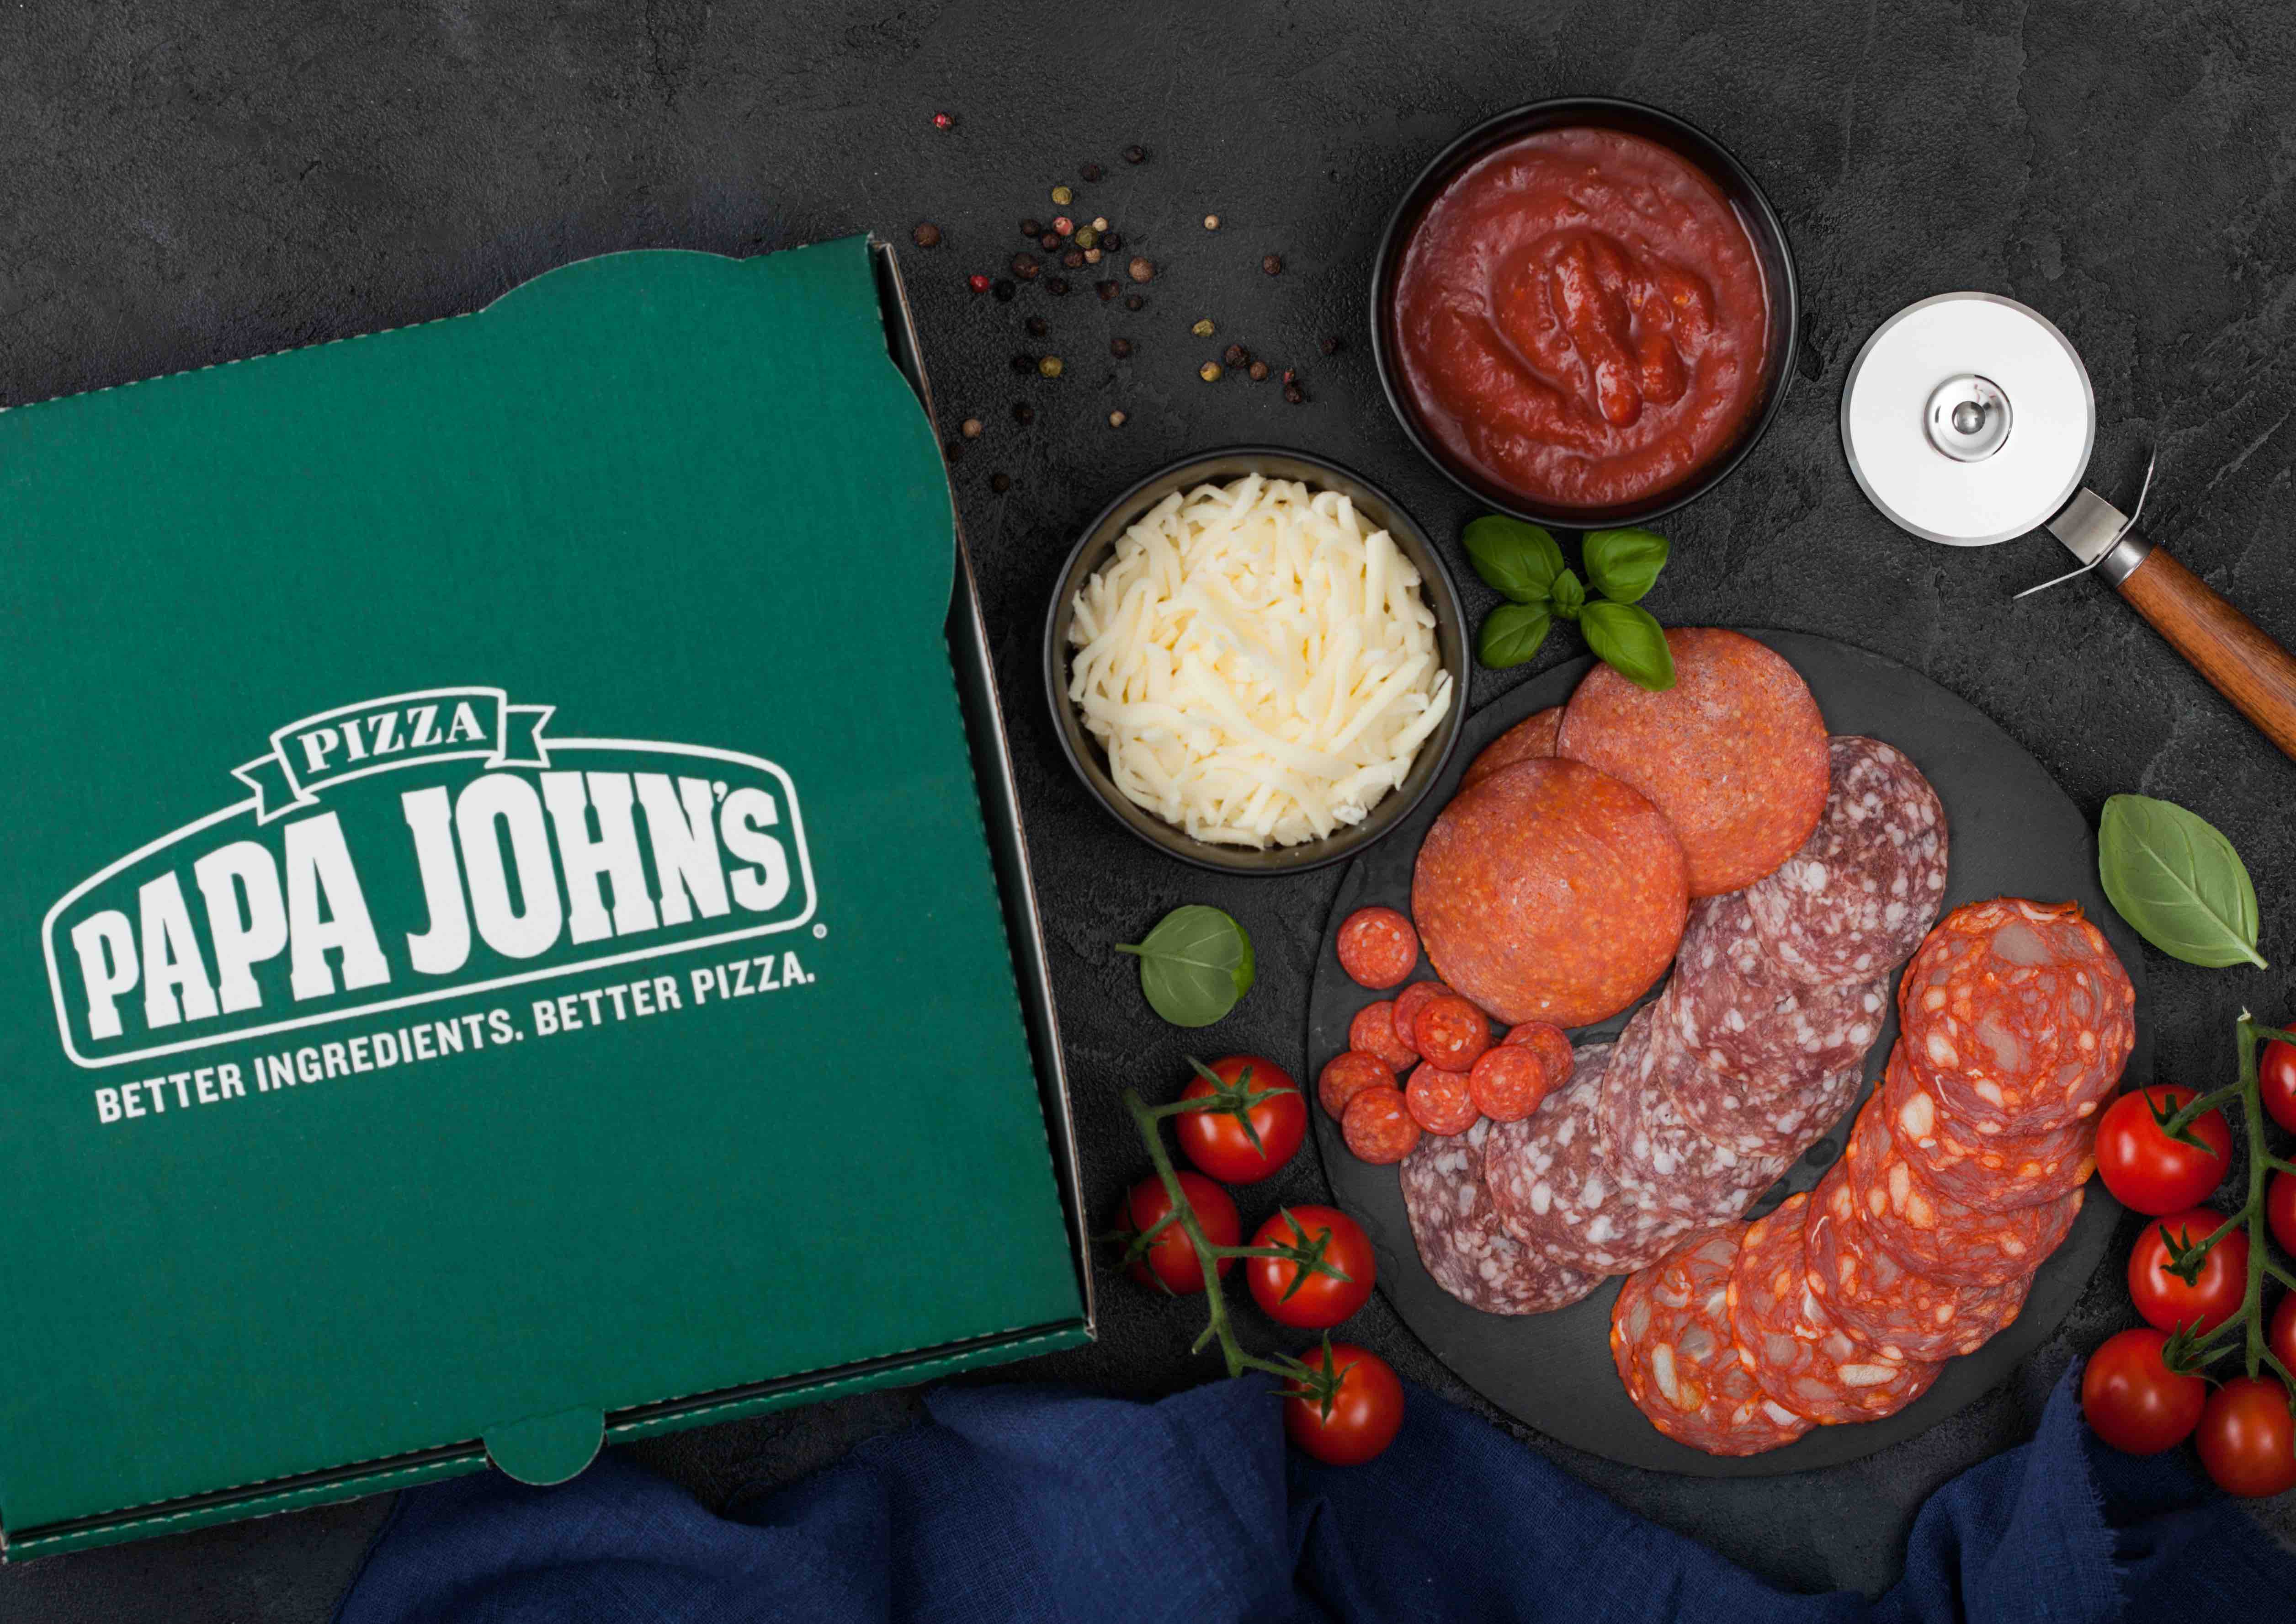 Papa John's Launches 4 New Meaty Vegan Pizzas With Pepperoni And Sausage